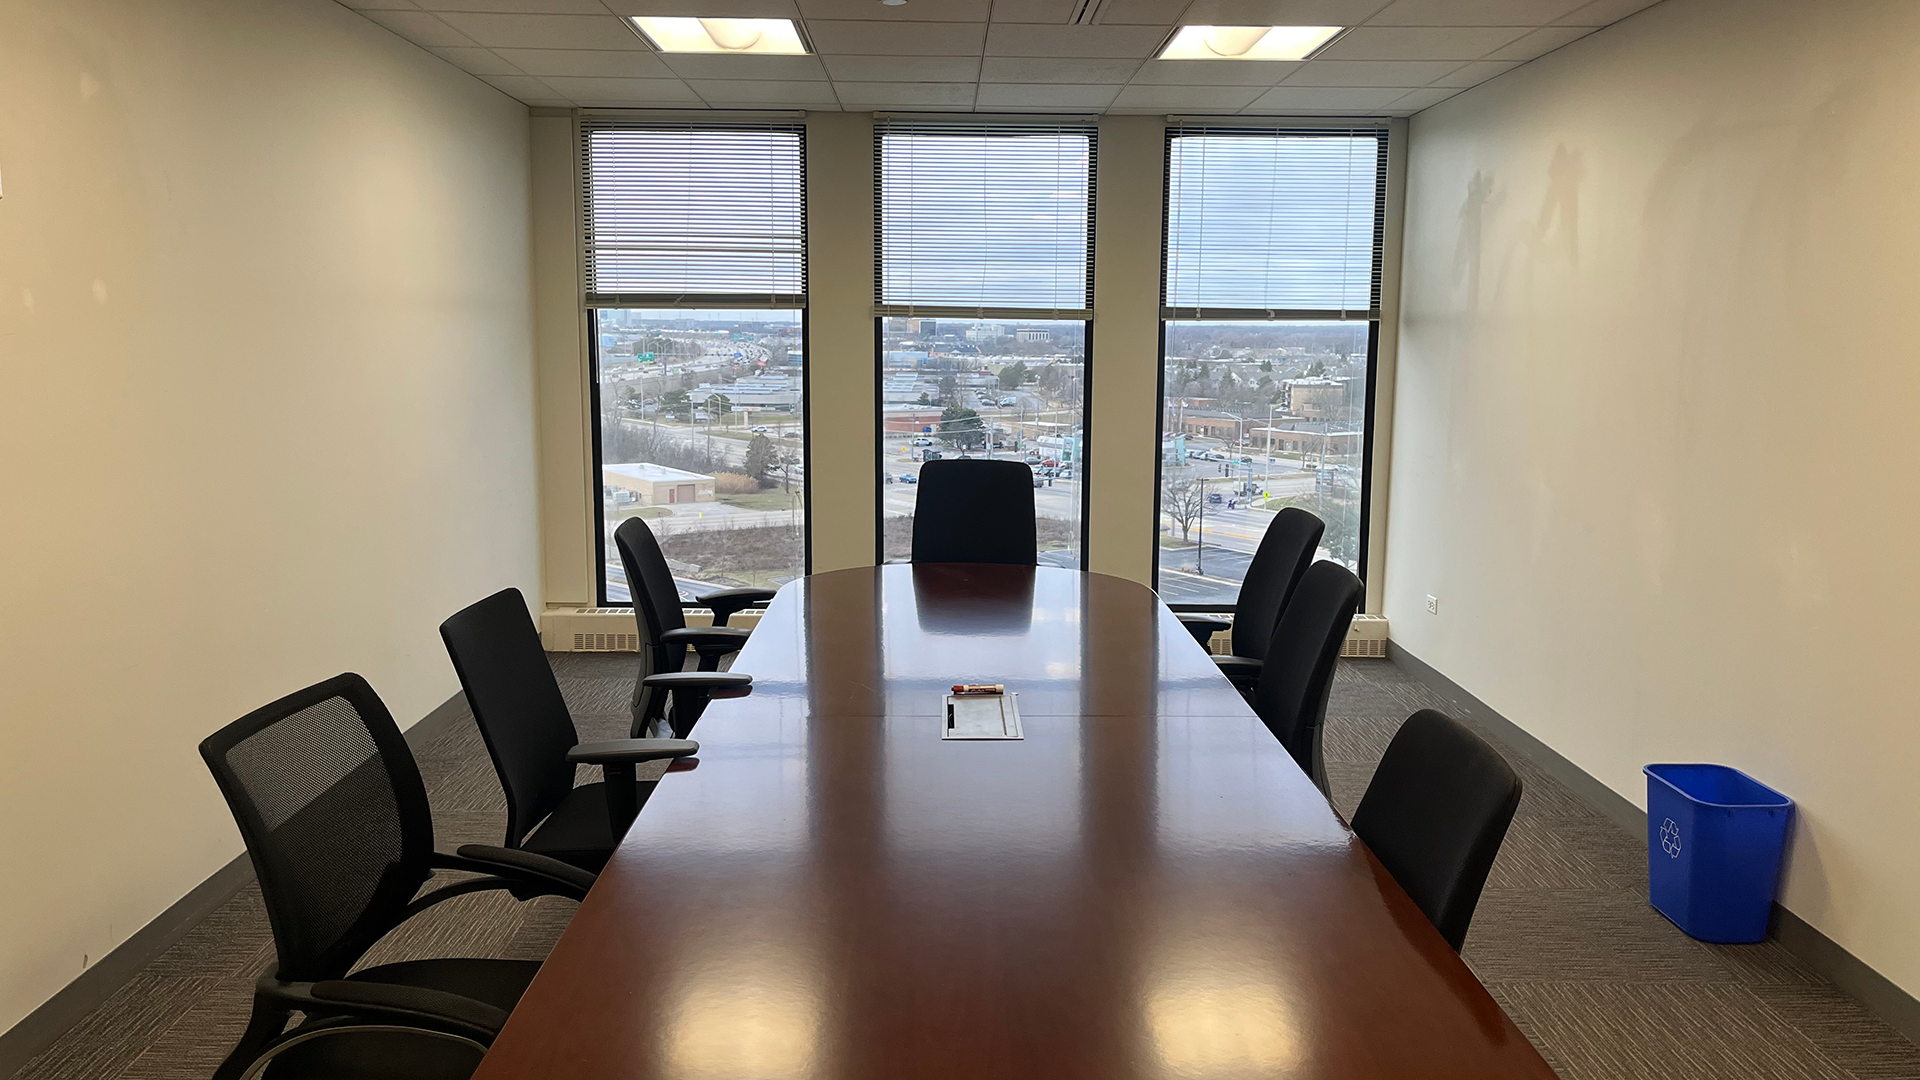 1701 Golf Rd - Conference room